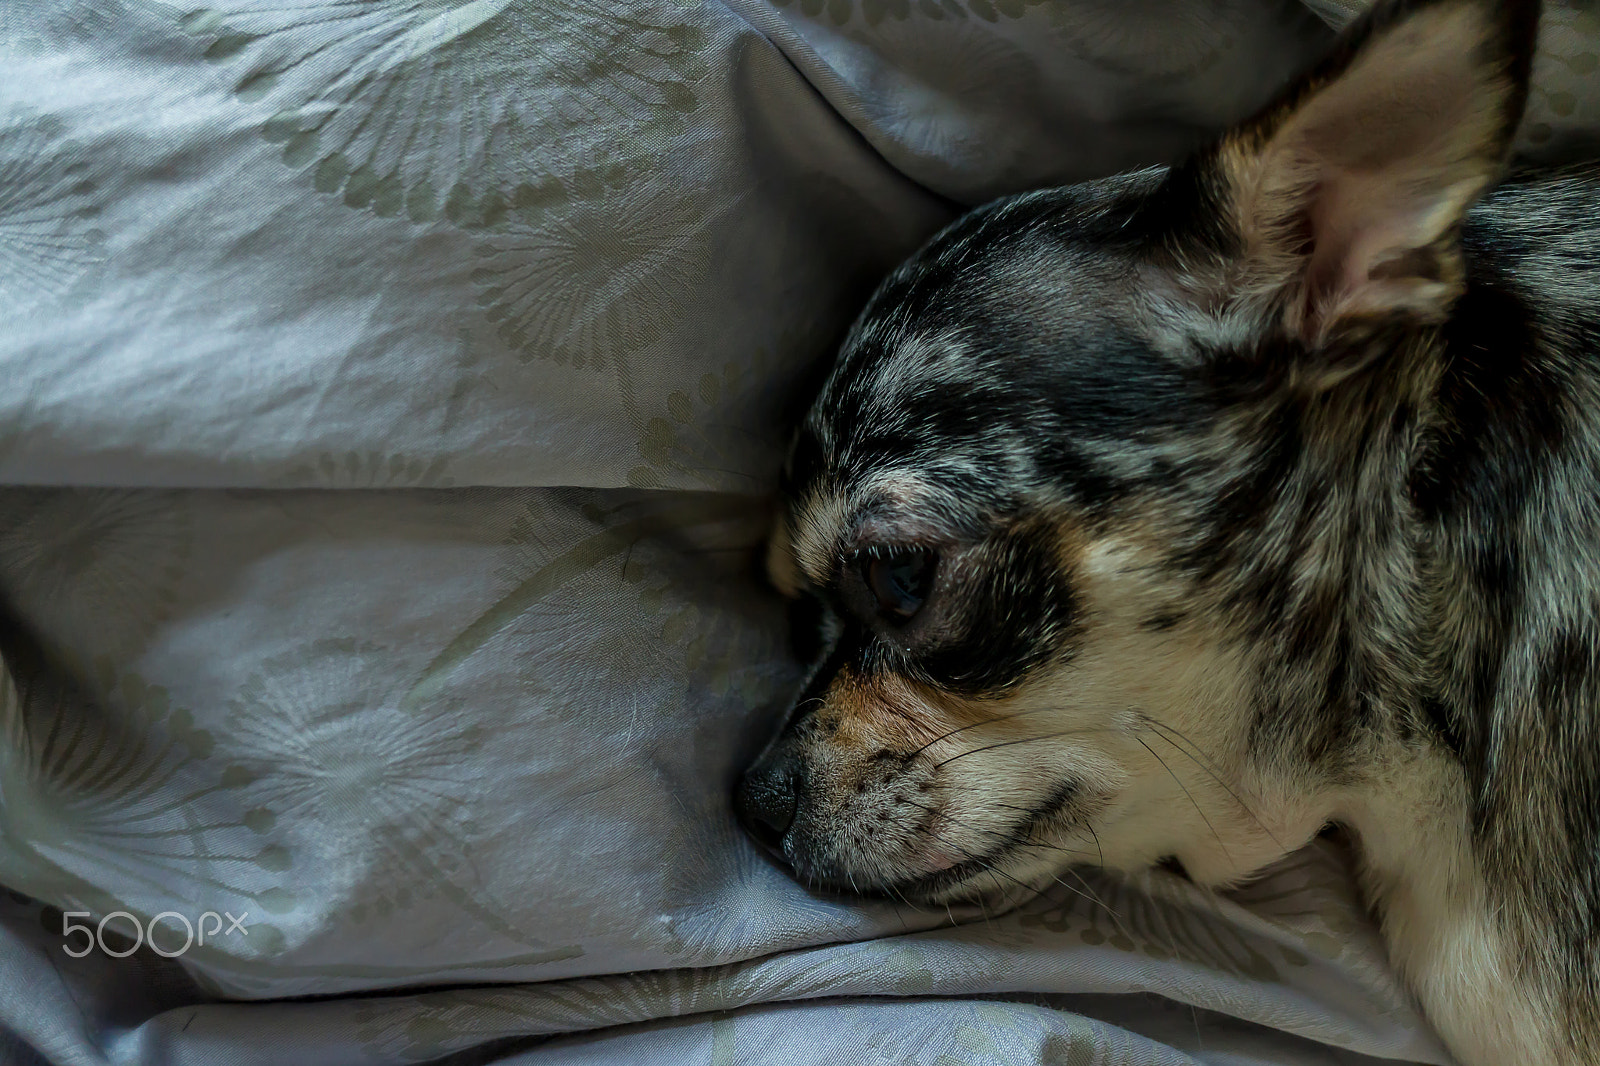 Sony a6300 sample photo. Chihuahua tiger hairs lethargic on the bed photography